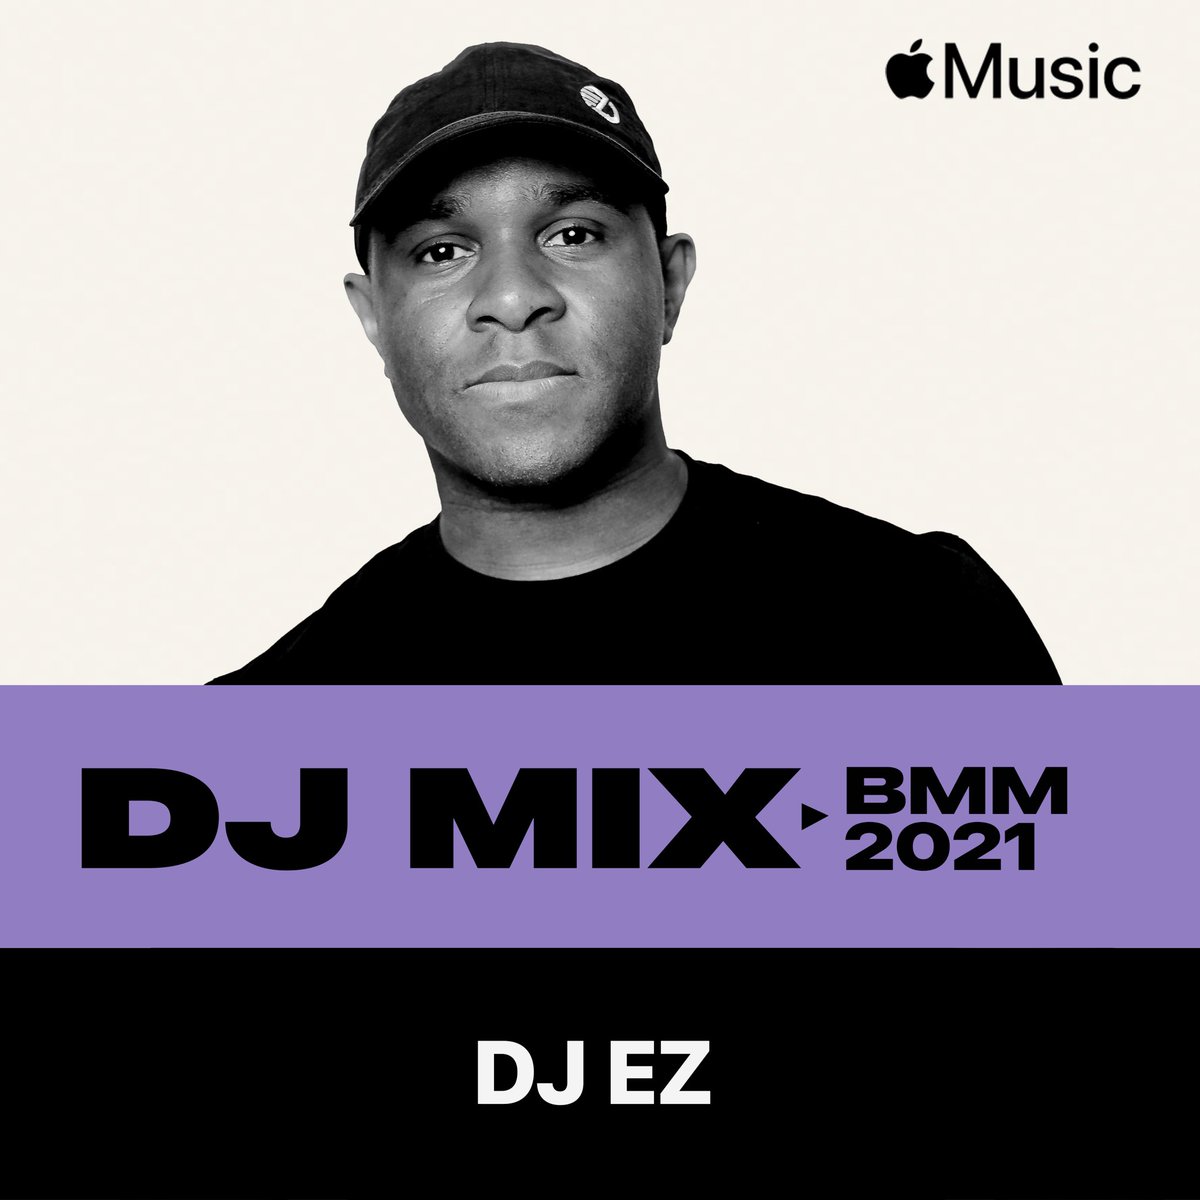 I’ve partnered with @AppleMusic to bring you an exclusive 60-minute UK Garage mix. Click the link to listen and enjoy! 🔥🎧 music.apple.com/gb/album/black…